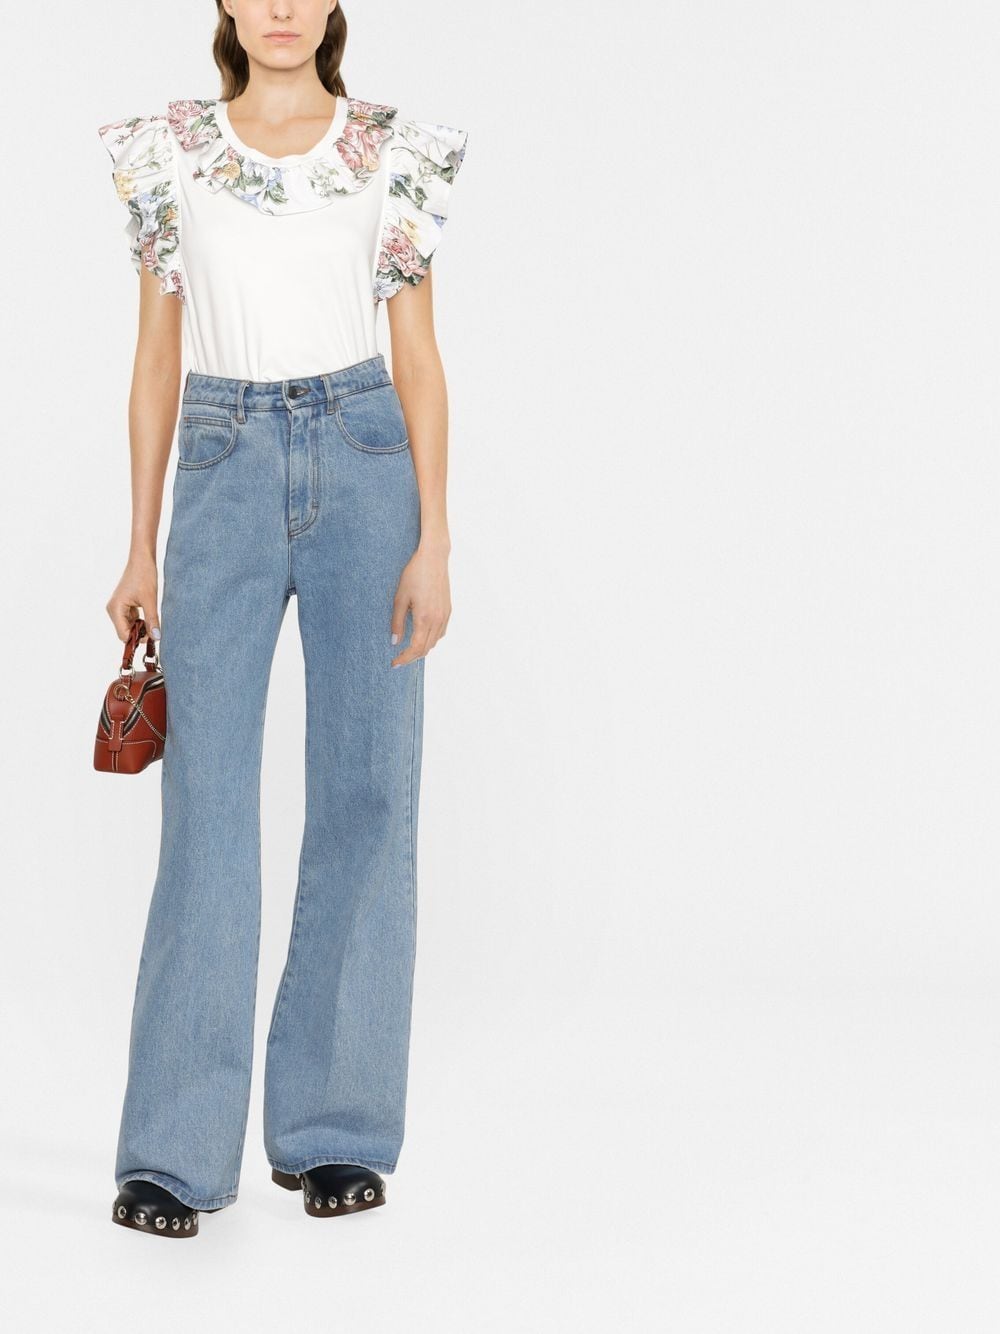 Image 2 of See by Chloé cotton floral-trim T-shirt